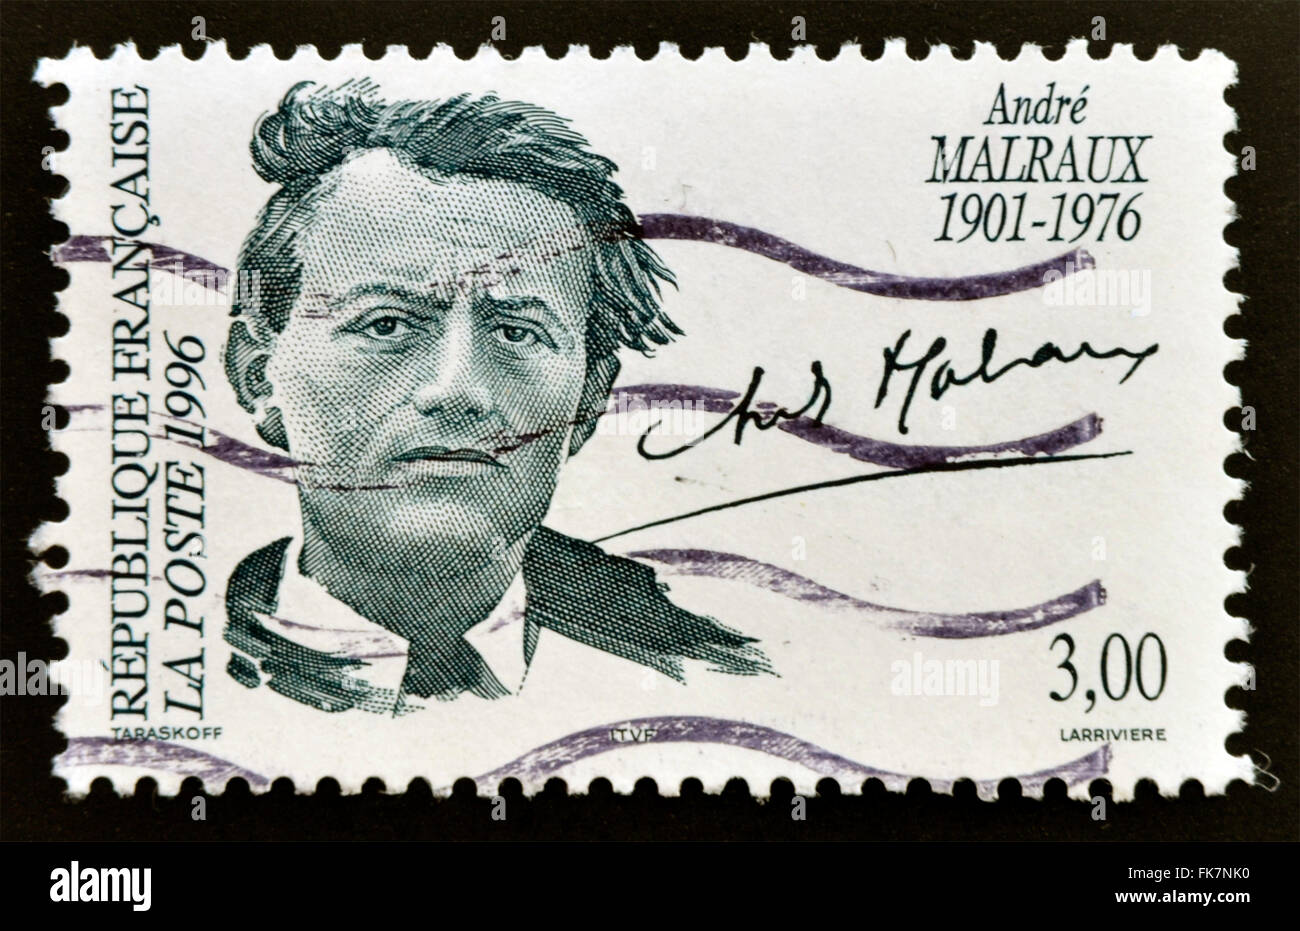 FRANCE - CIRCA 1996: a stamp printed in the France shows Andre Malraux, Writer, Minister for Cultural Affairs, circa 1996 Stock Photo